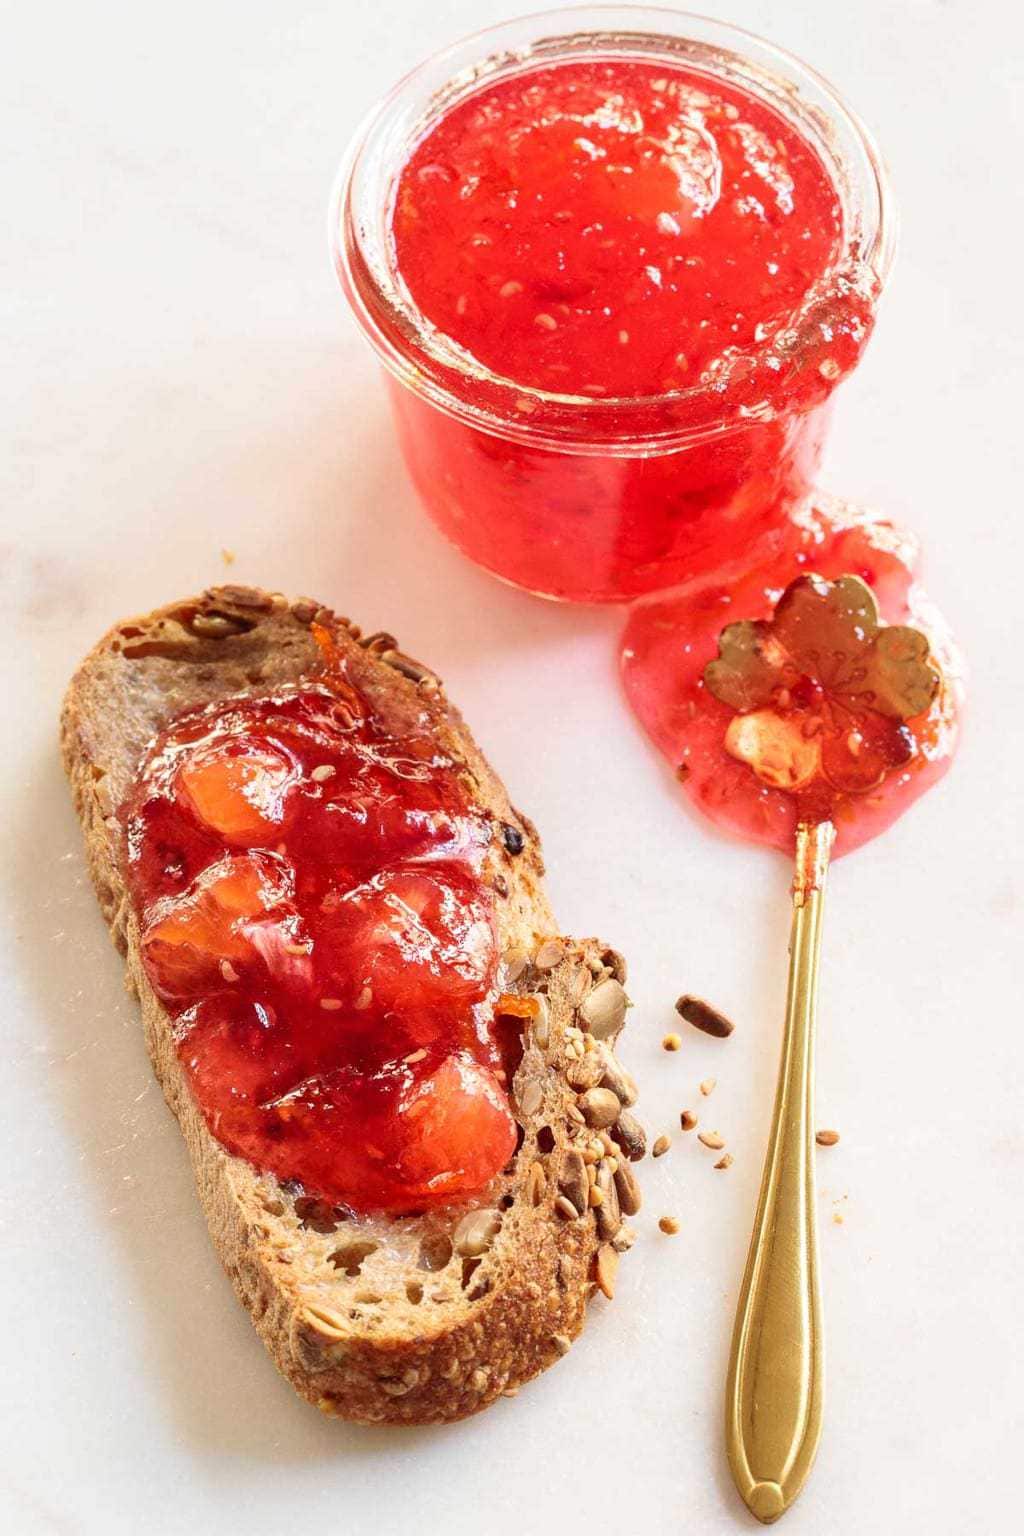 Overhead picture of raspberry meyer lemon marmalade in a glass jar and also spread on toast with a small gold spoon